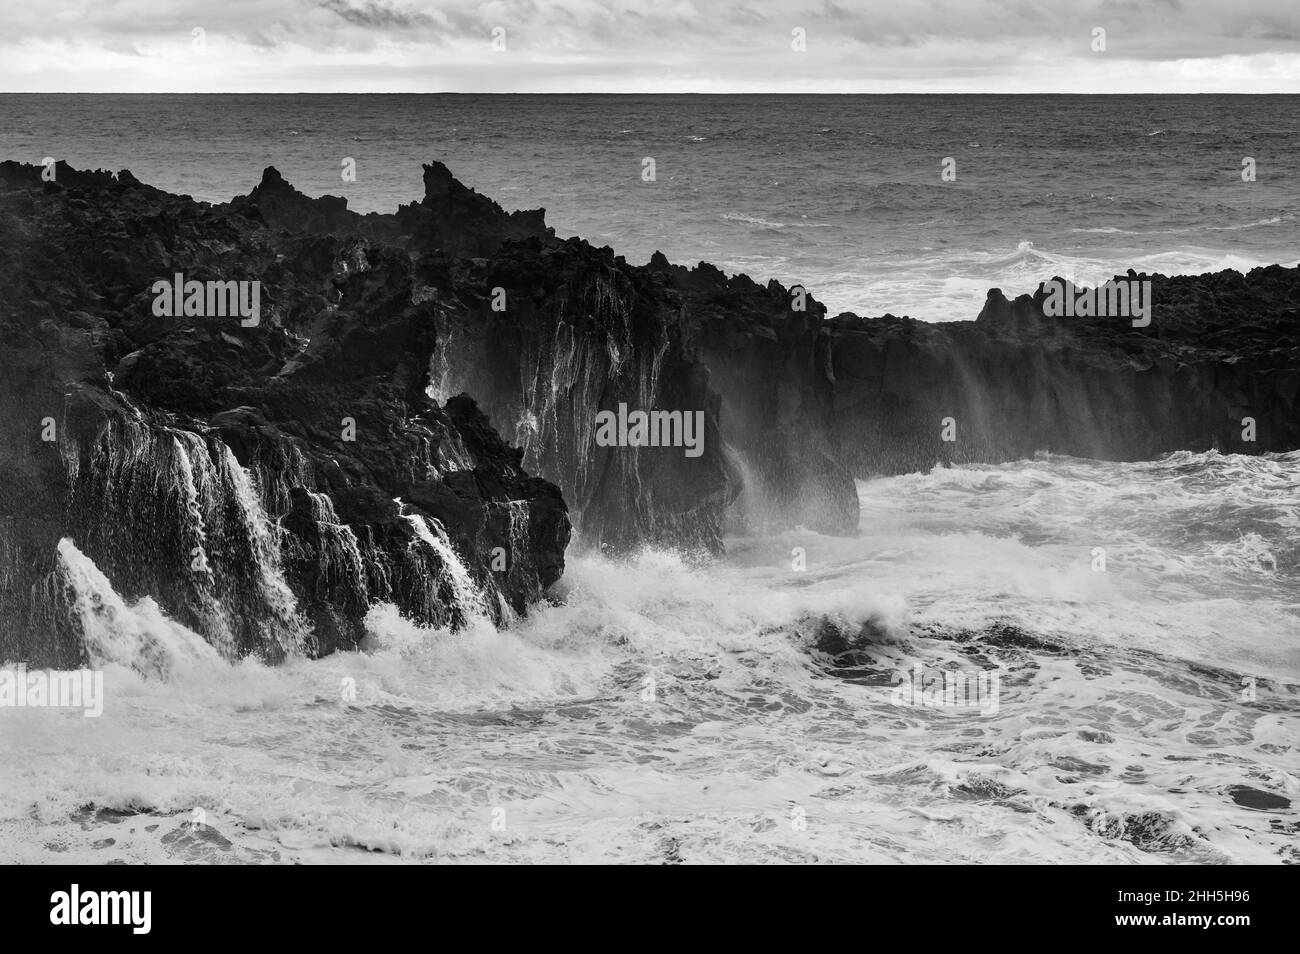 Volcanic coast with high tide waves in Ponta da Ferraria, San Miguel, Azores, Portugal Stock Photo